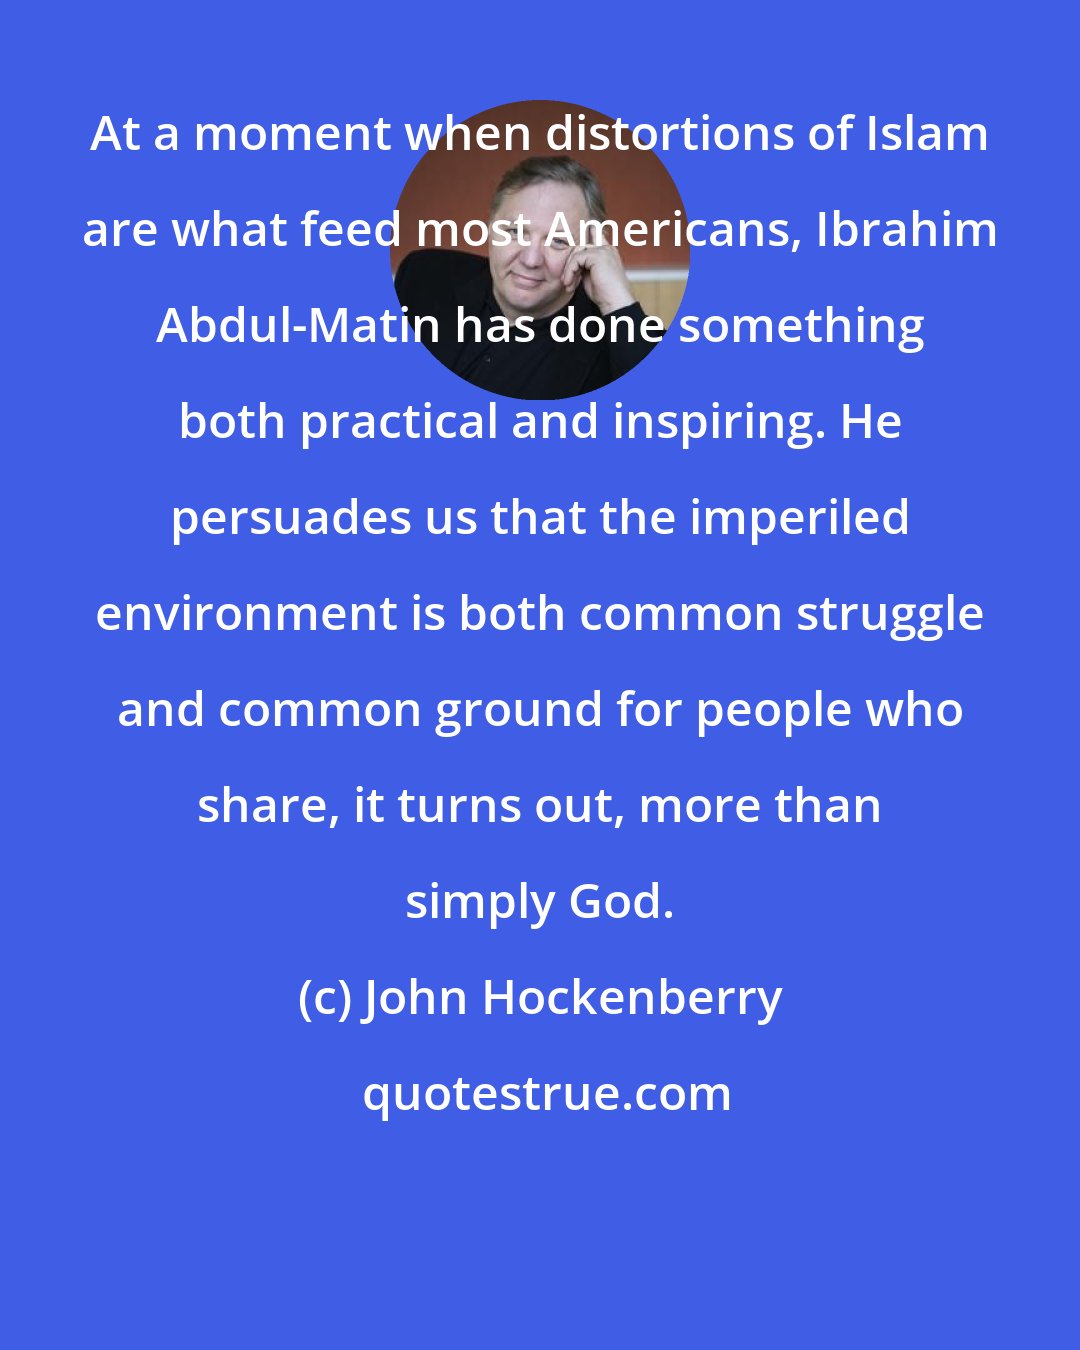 John Hockenberry: At a moment when distortions of Islam are what feed most Americans, Ibrahim Abdul-Matin has done something both practical and inspiring. He persuades us that the imperiled environment is both common struggle and common ground for people who share, it turns out, more than simply God.